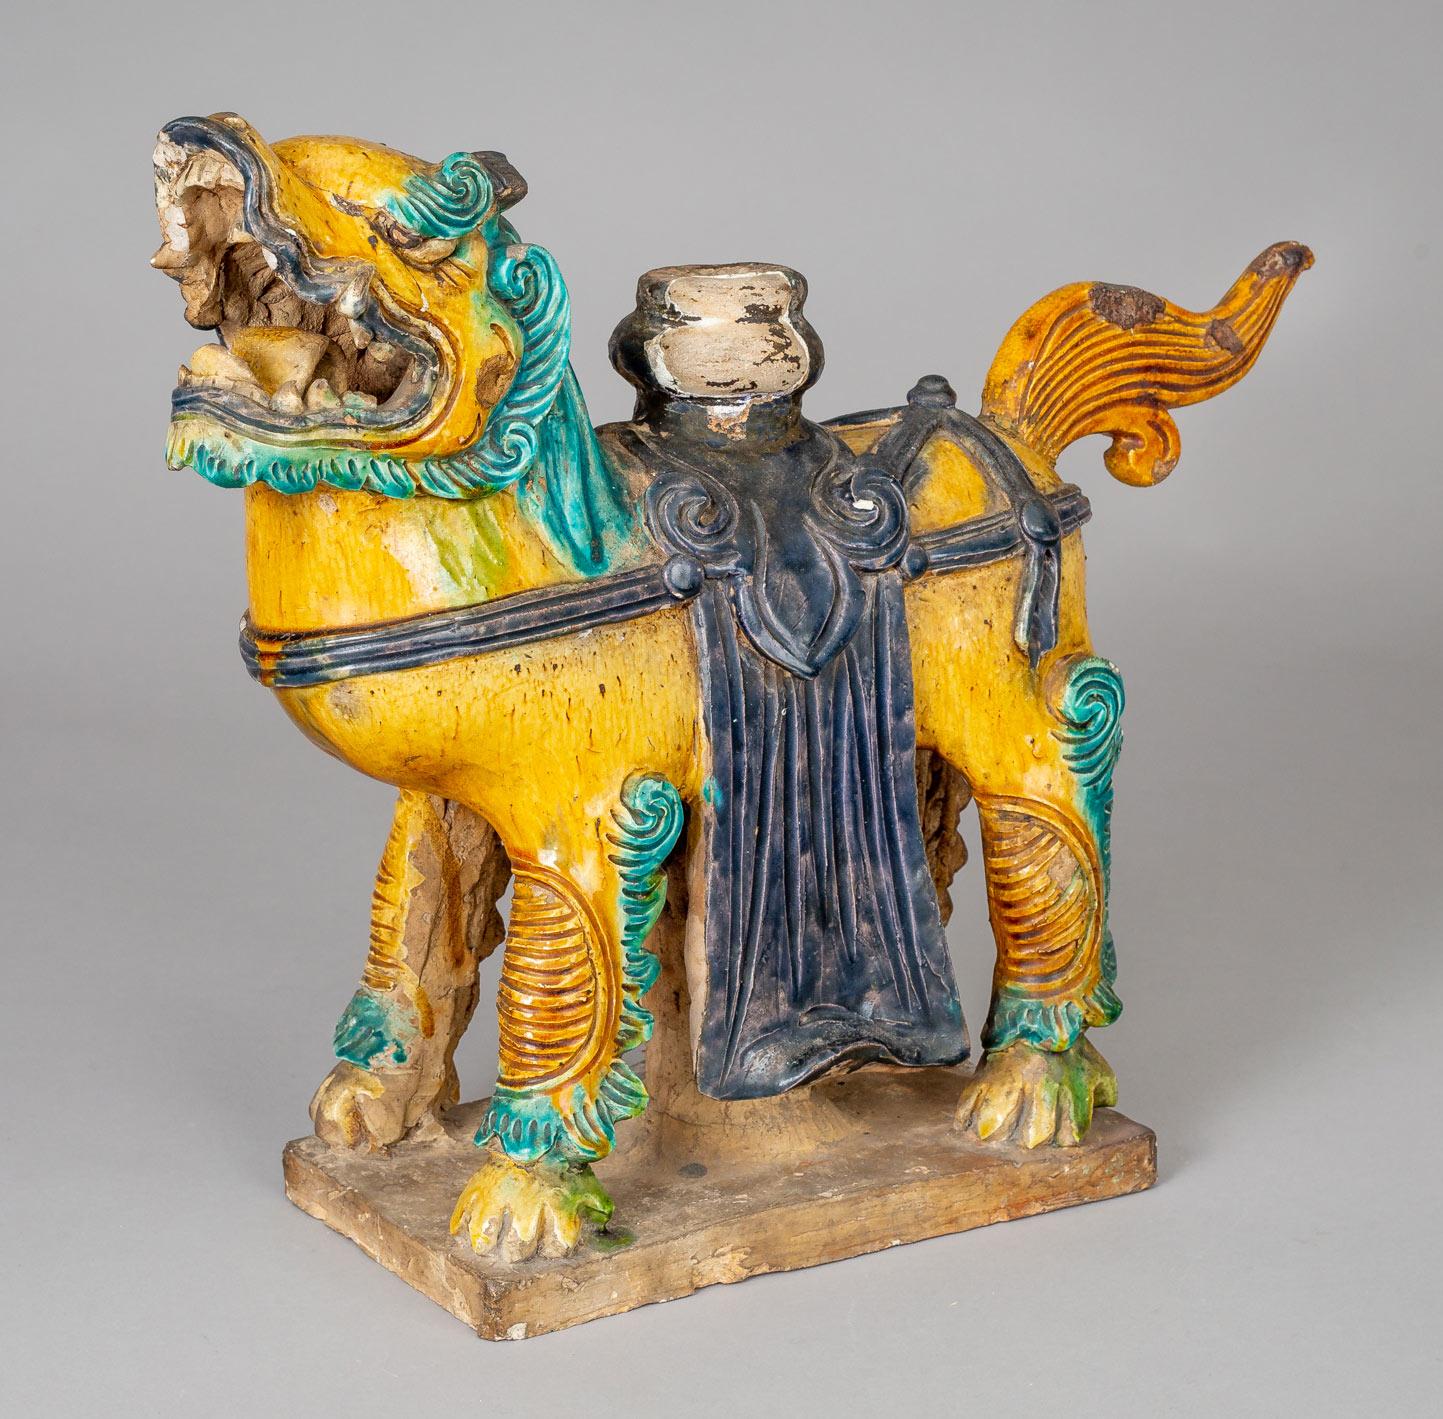 Large and antique Chinese Sancai glazed pottery guardian lion, its mouth drawn back in a snarl, wearing a shawl and carrying an urn on its back, standing four square on a plinth. Possibly a roof ridge tile. Provenance: The Sears Estate.